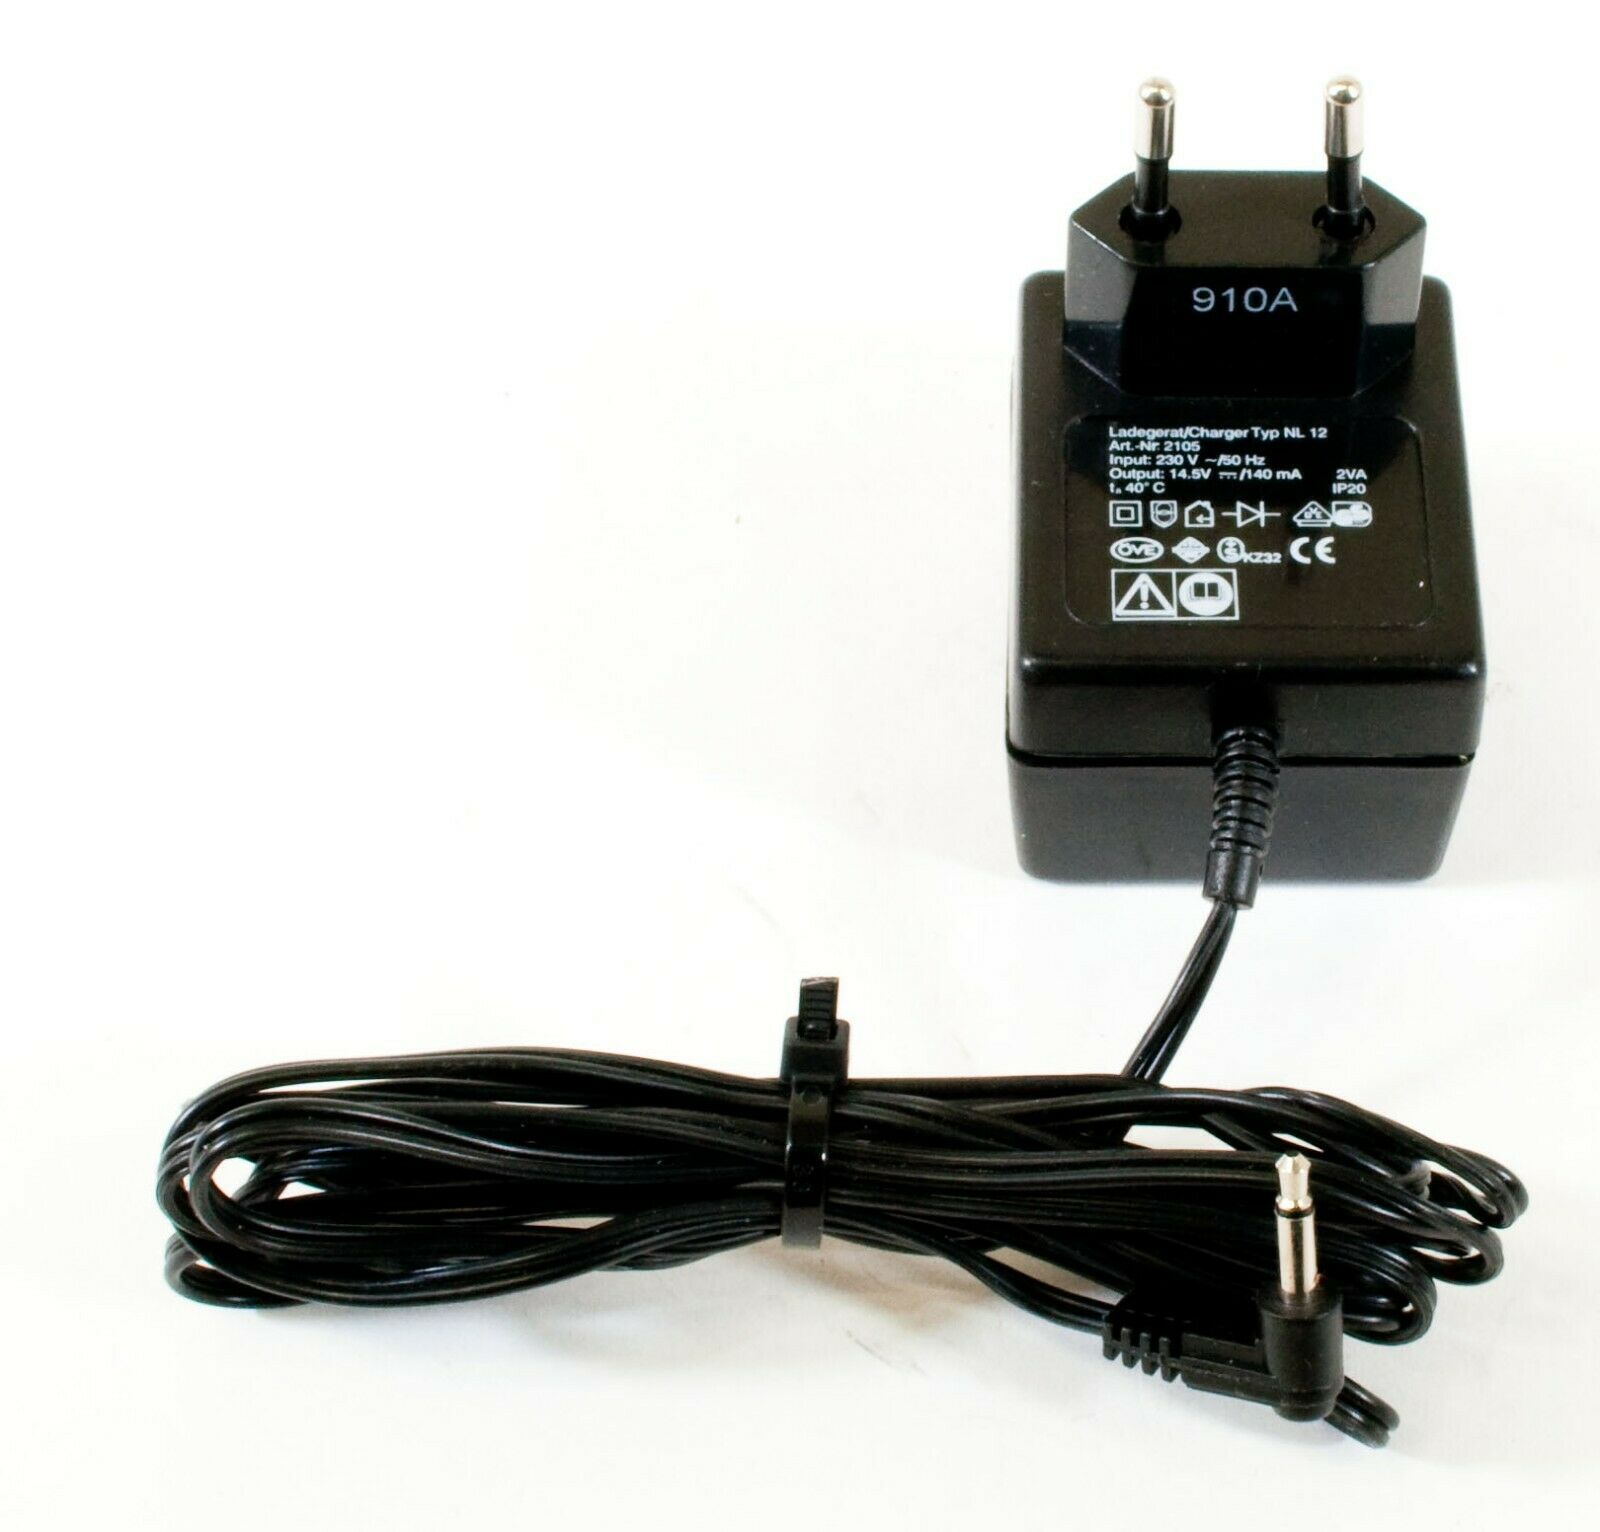 Gardena Charger Typ NL 12 AC Adapter 14.5V 140mA Power Supply Output Current: 140 mA Voltage: 14.5 V MPN: Typ NL 12, N